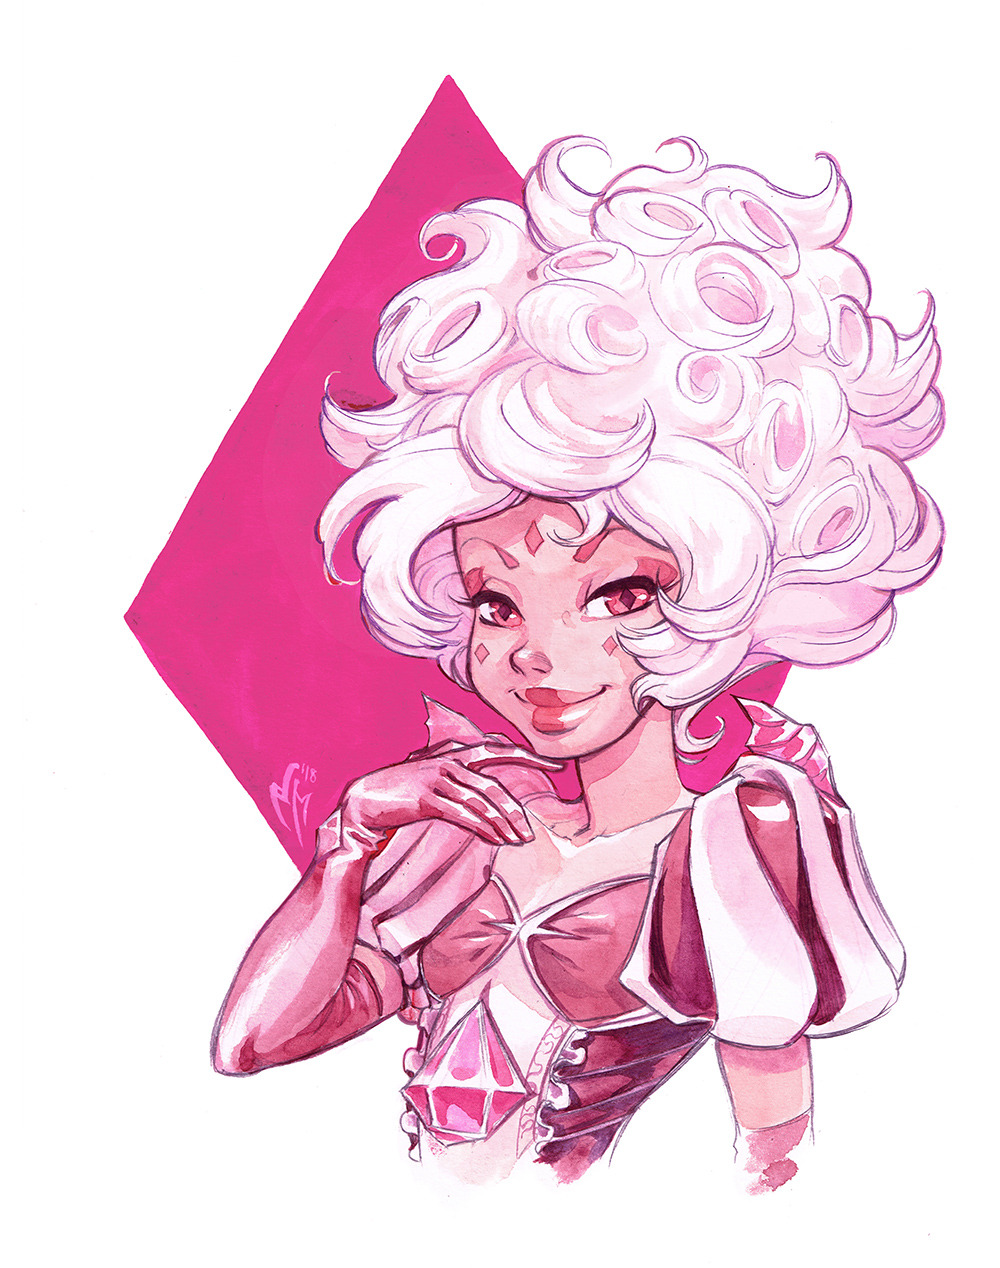 One more of my series of fanarts of the Diamonds from Steven Universe! After Yellow and Blue… Here comes Pink Diamond! Having a lot of fun imagining how their designs would translate to my style :D